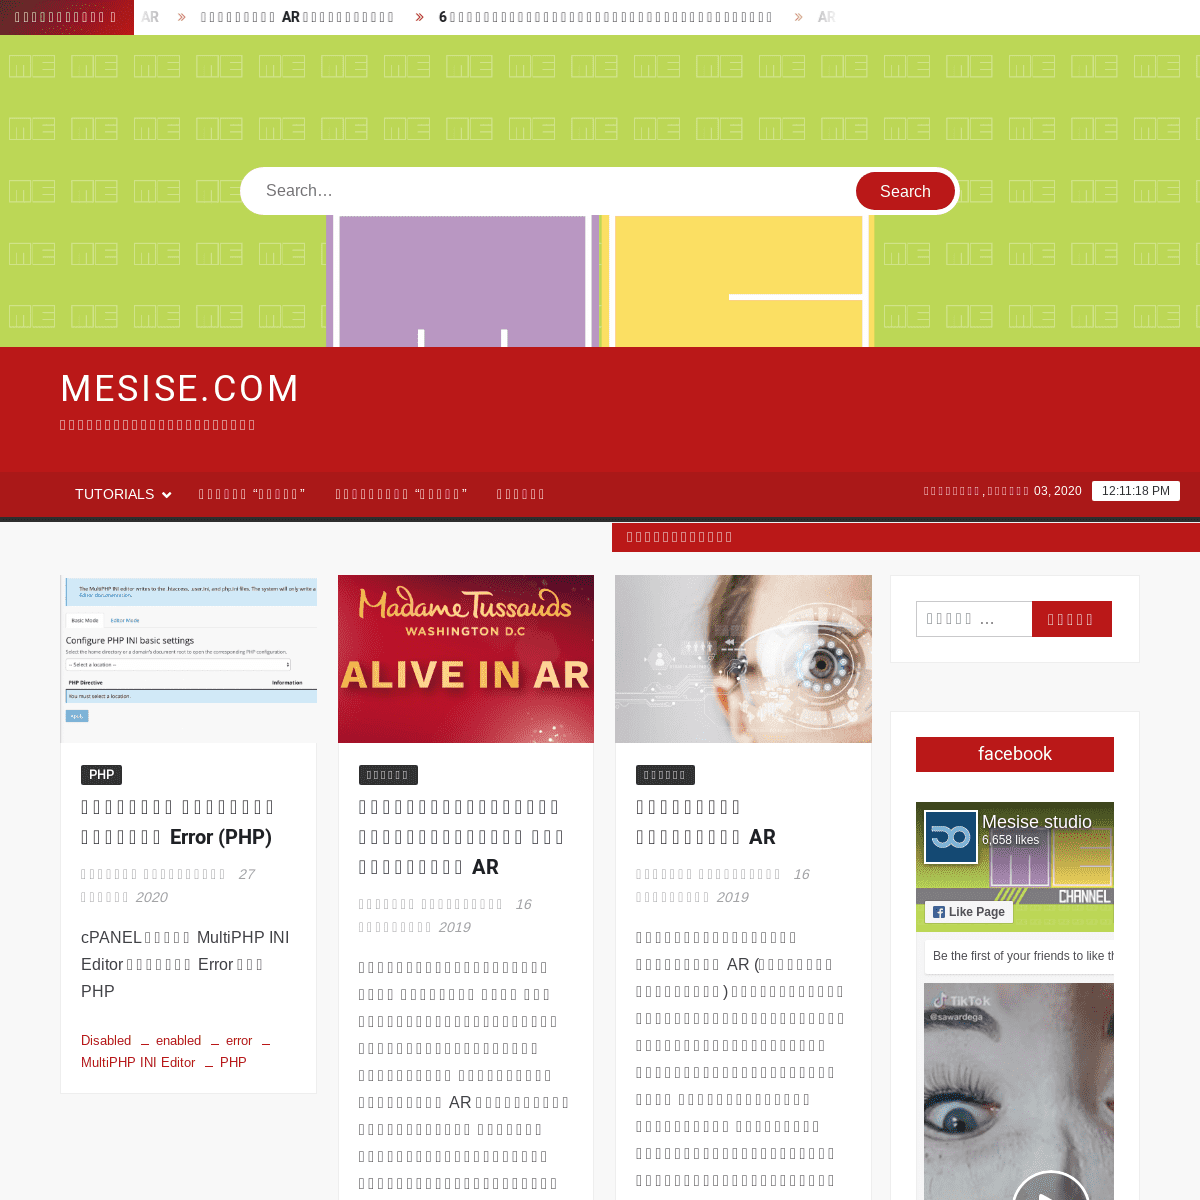 A complete backup of mesise.com